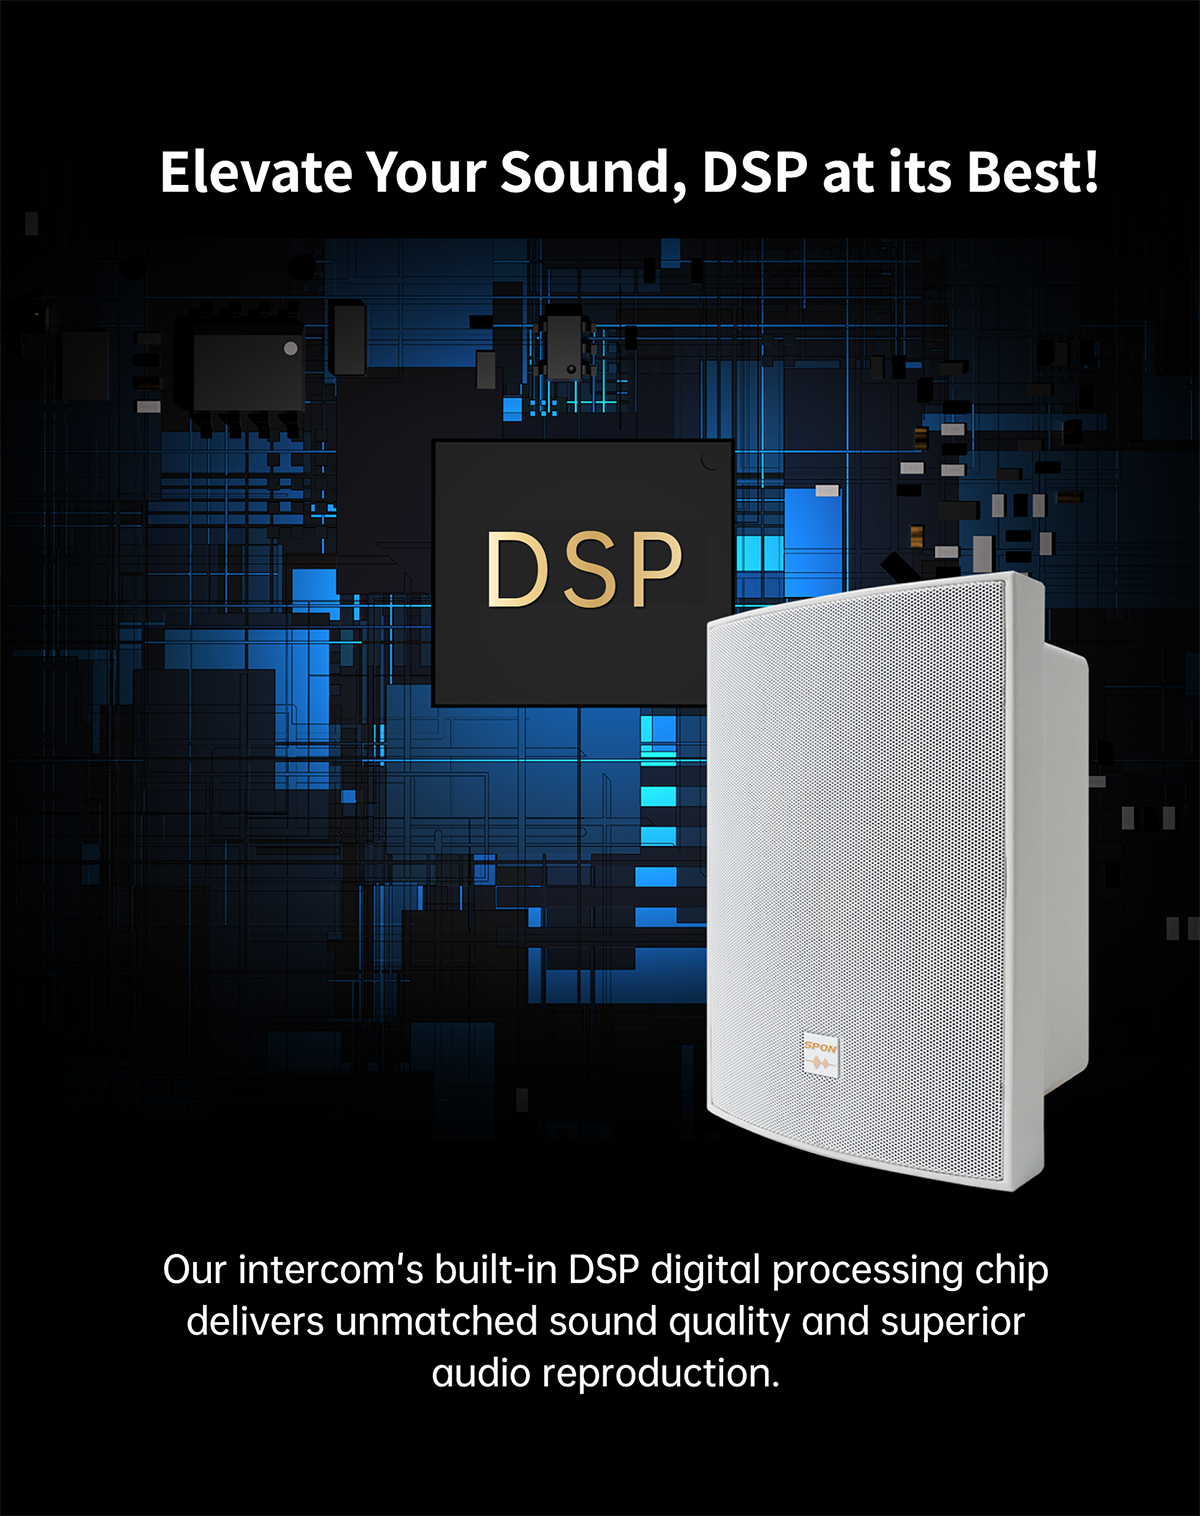 Network IP POE Wall Mount PA System Speaker, remote control,All-in-one with digital amplifier and Speaker. our intercom's built-in DSP digital processing chip delivers unmatched sound quality and superior audio reproduction